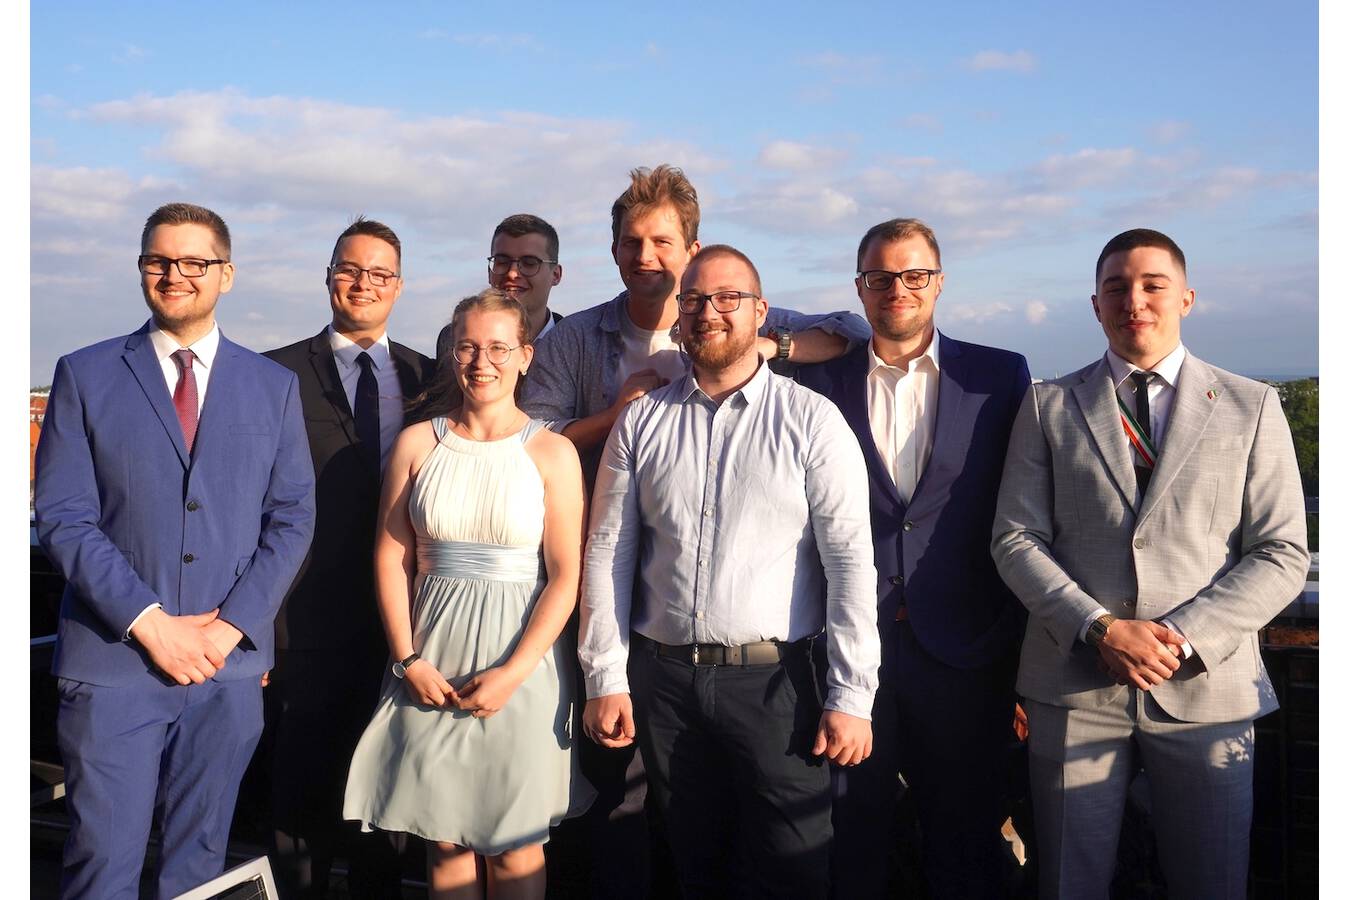 Successful graduation ceremony for DMSB graduates On July 8, 2022, the nine successful graduates of the German Milling School Braunschweig (DMSB) received their certificates and diplomas during the graduation ceremony and now hold the title ”Bachelor Professional in Technology”.